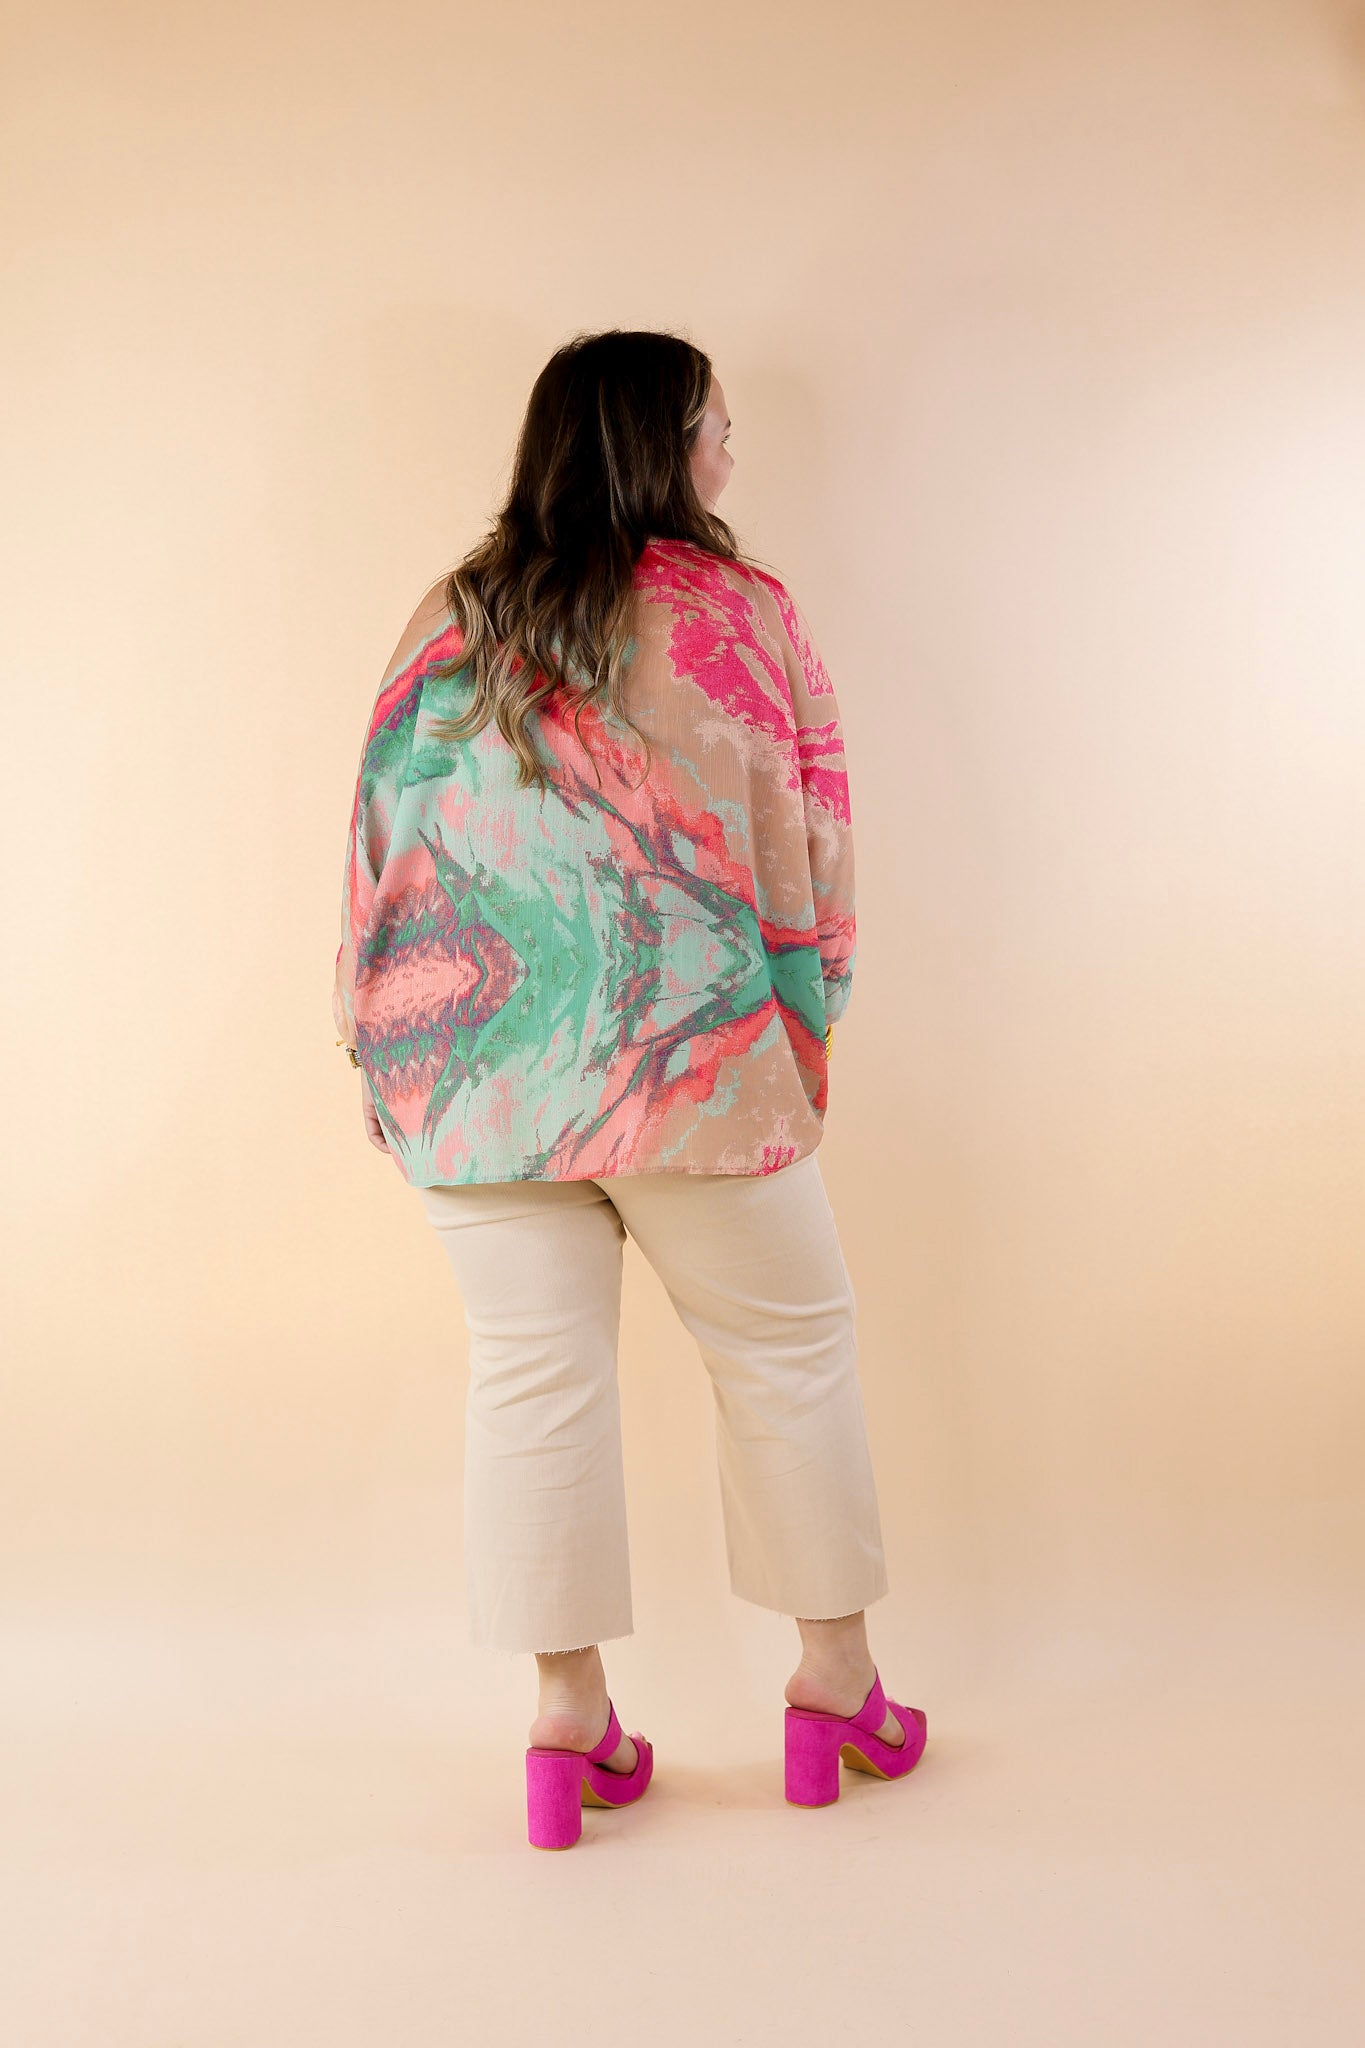 Colorful Dreams Half Sleeve Top With Pink Marble Print in Beige - Giddy Up Glamour Boutique